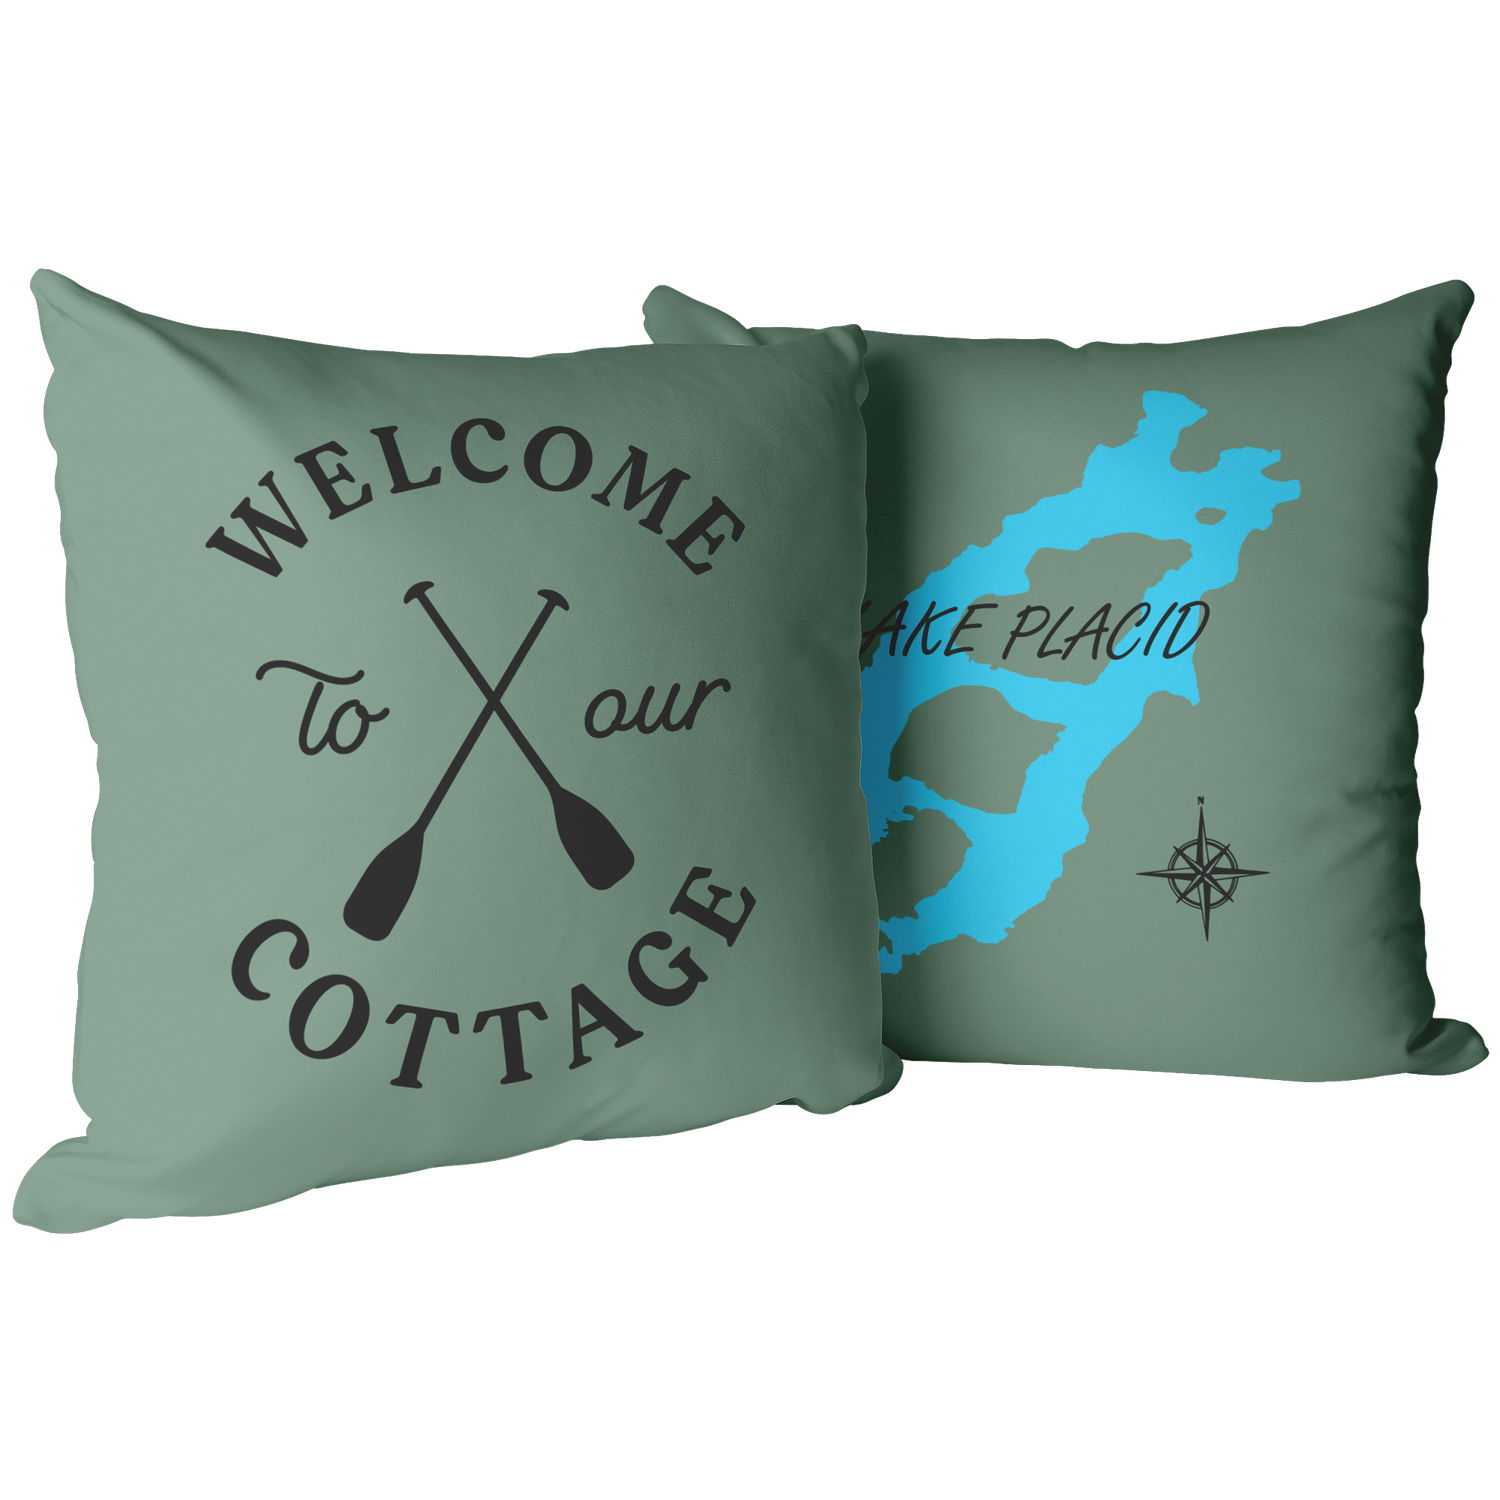 Sage green welcome to our cottage pillow featuring lake placid, NY